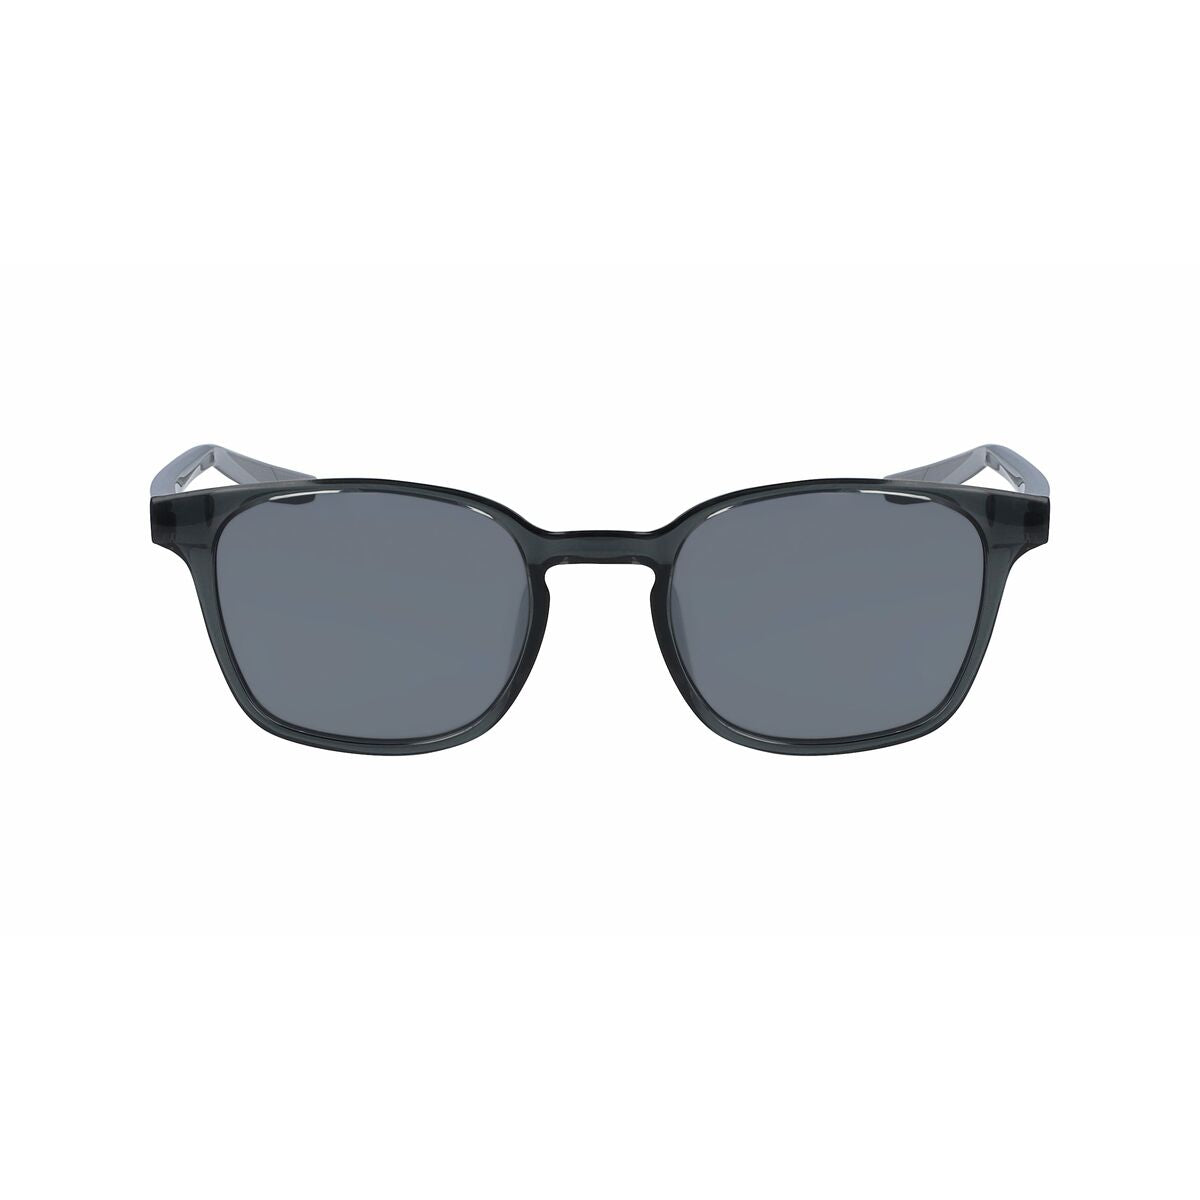 Nike Men's Sunglasses  Session-ct8129-065  51 Mm Gbby2 In Gray